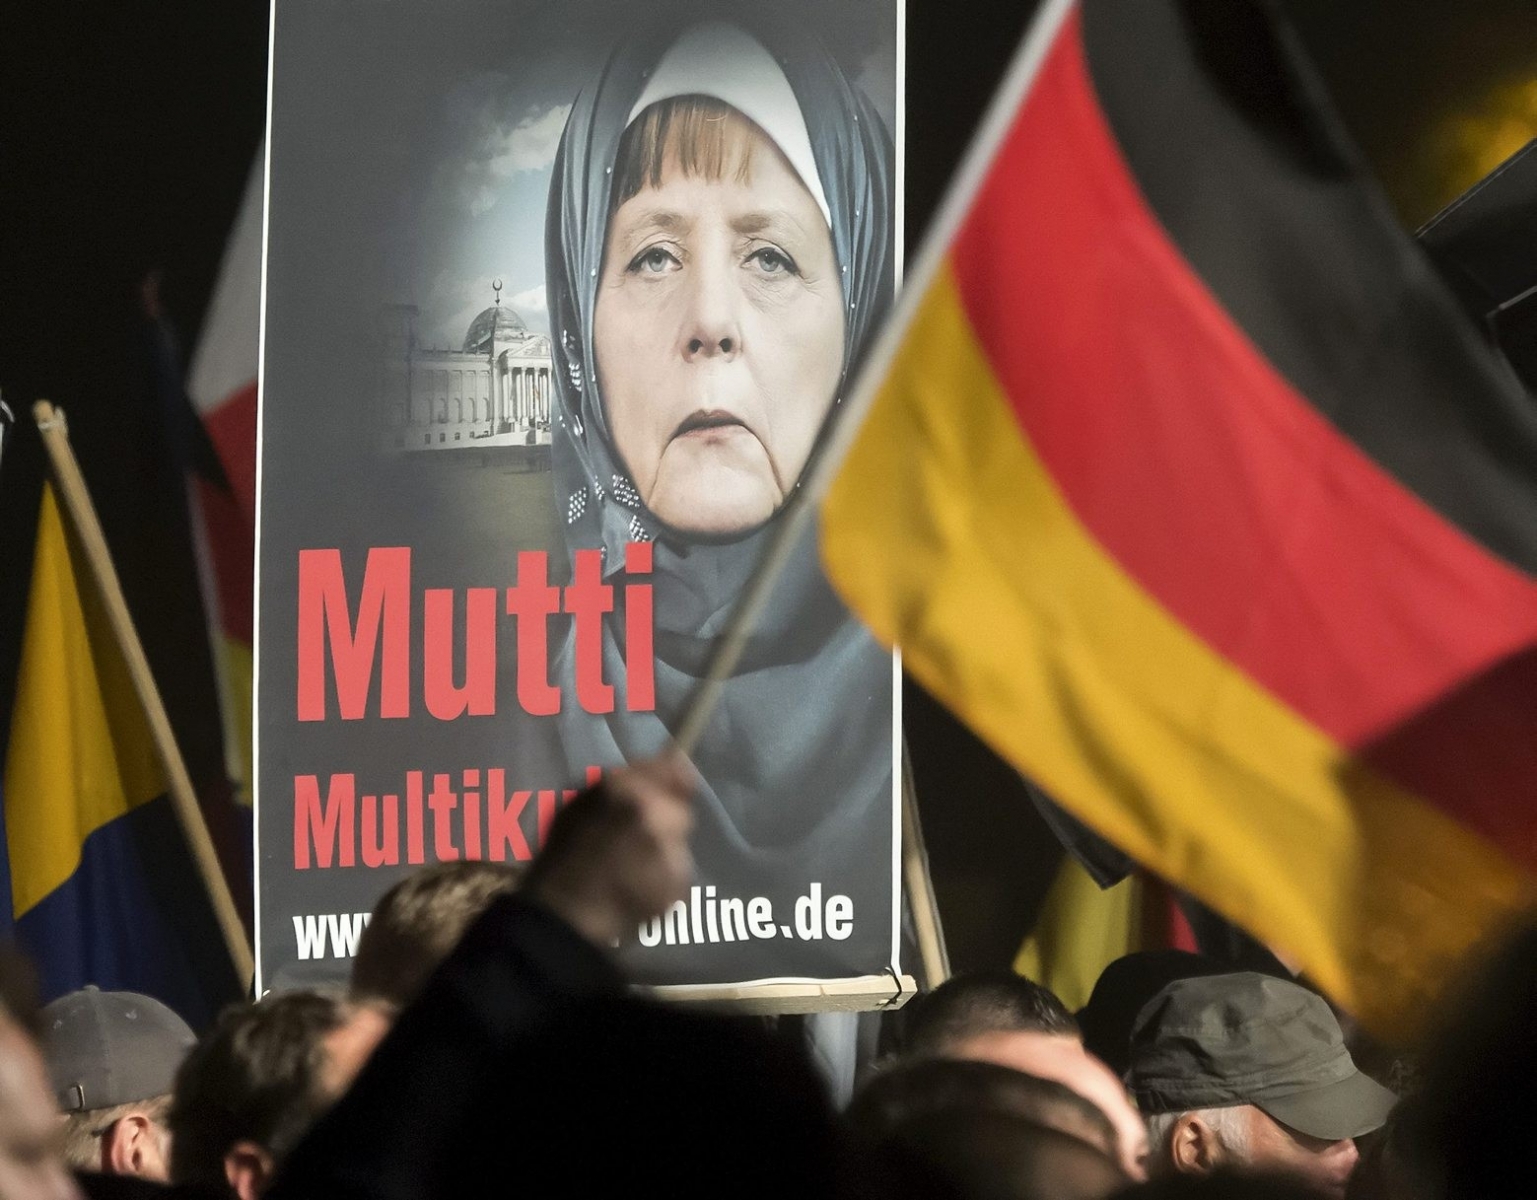 A banner reading 'Mum multiculti' and depicting a manipulated image German Chancellor Angela Merkel is carried by a protester behind the German flag as some thousands of people take part in a demonstration initiated by the Alternative for Germany (AfD) party against what they call the uncontrolled immigration and asylum abuse in Erfurt, central Germany, Wednesday, Oct. 28, 2015. (AP Photo/Jens Meyer) Germany Protests